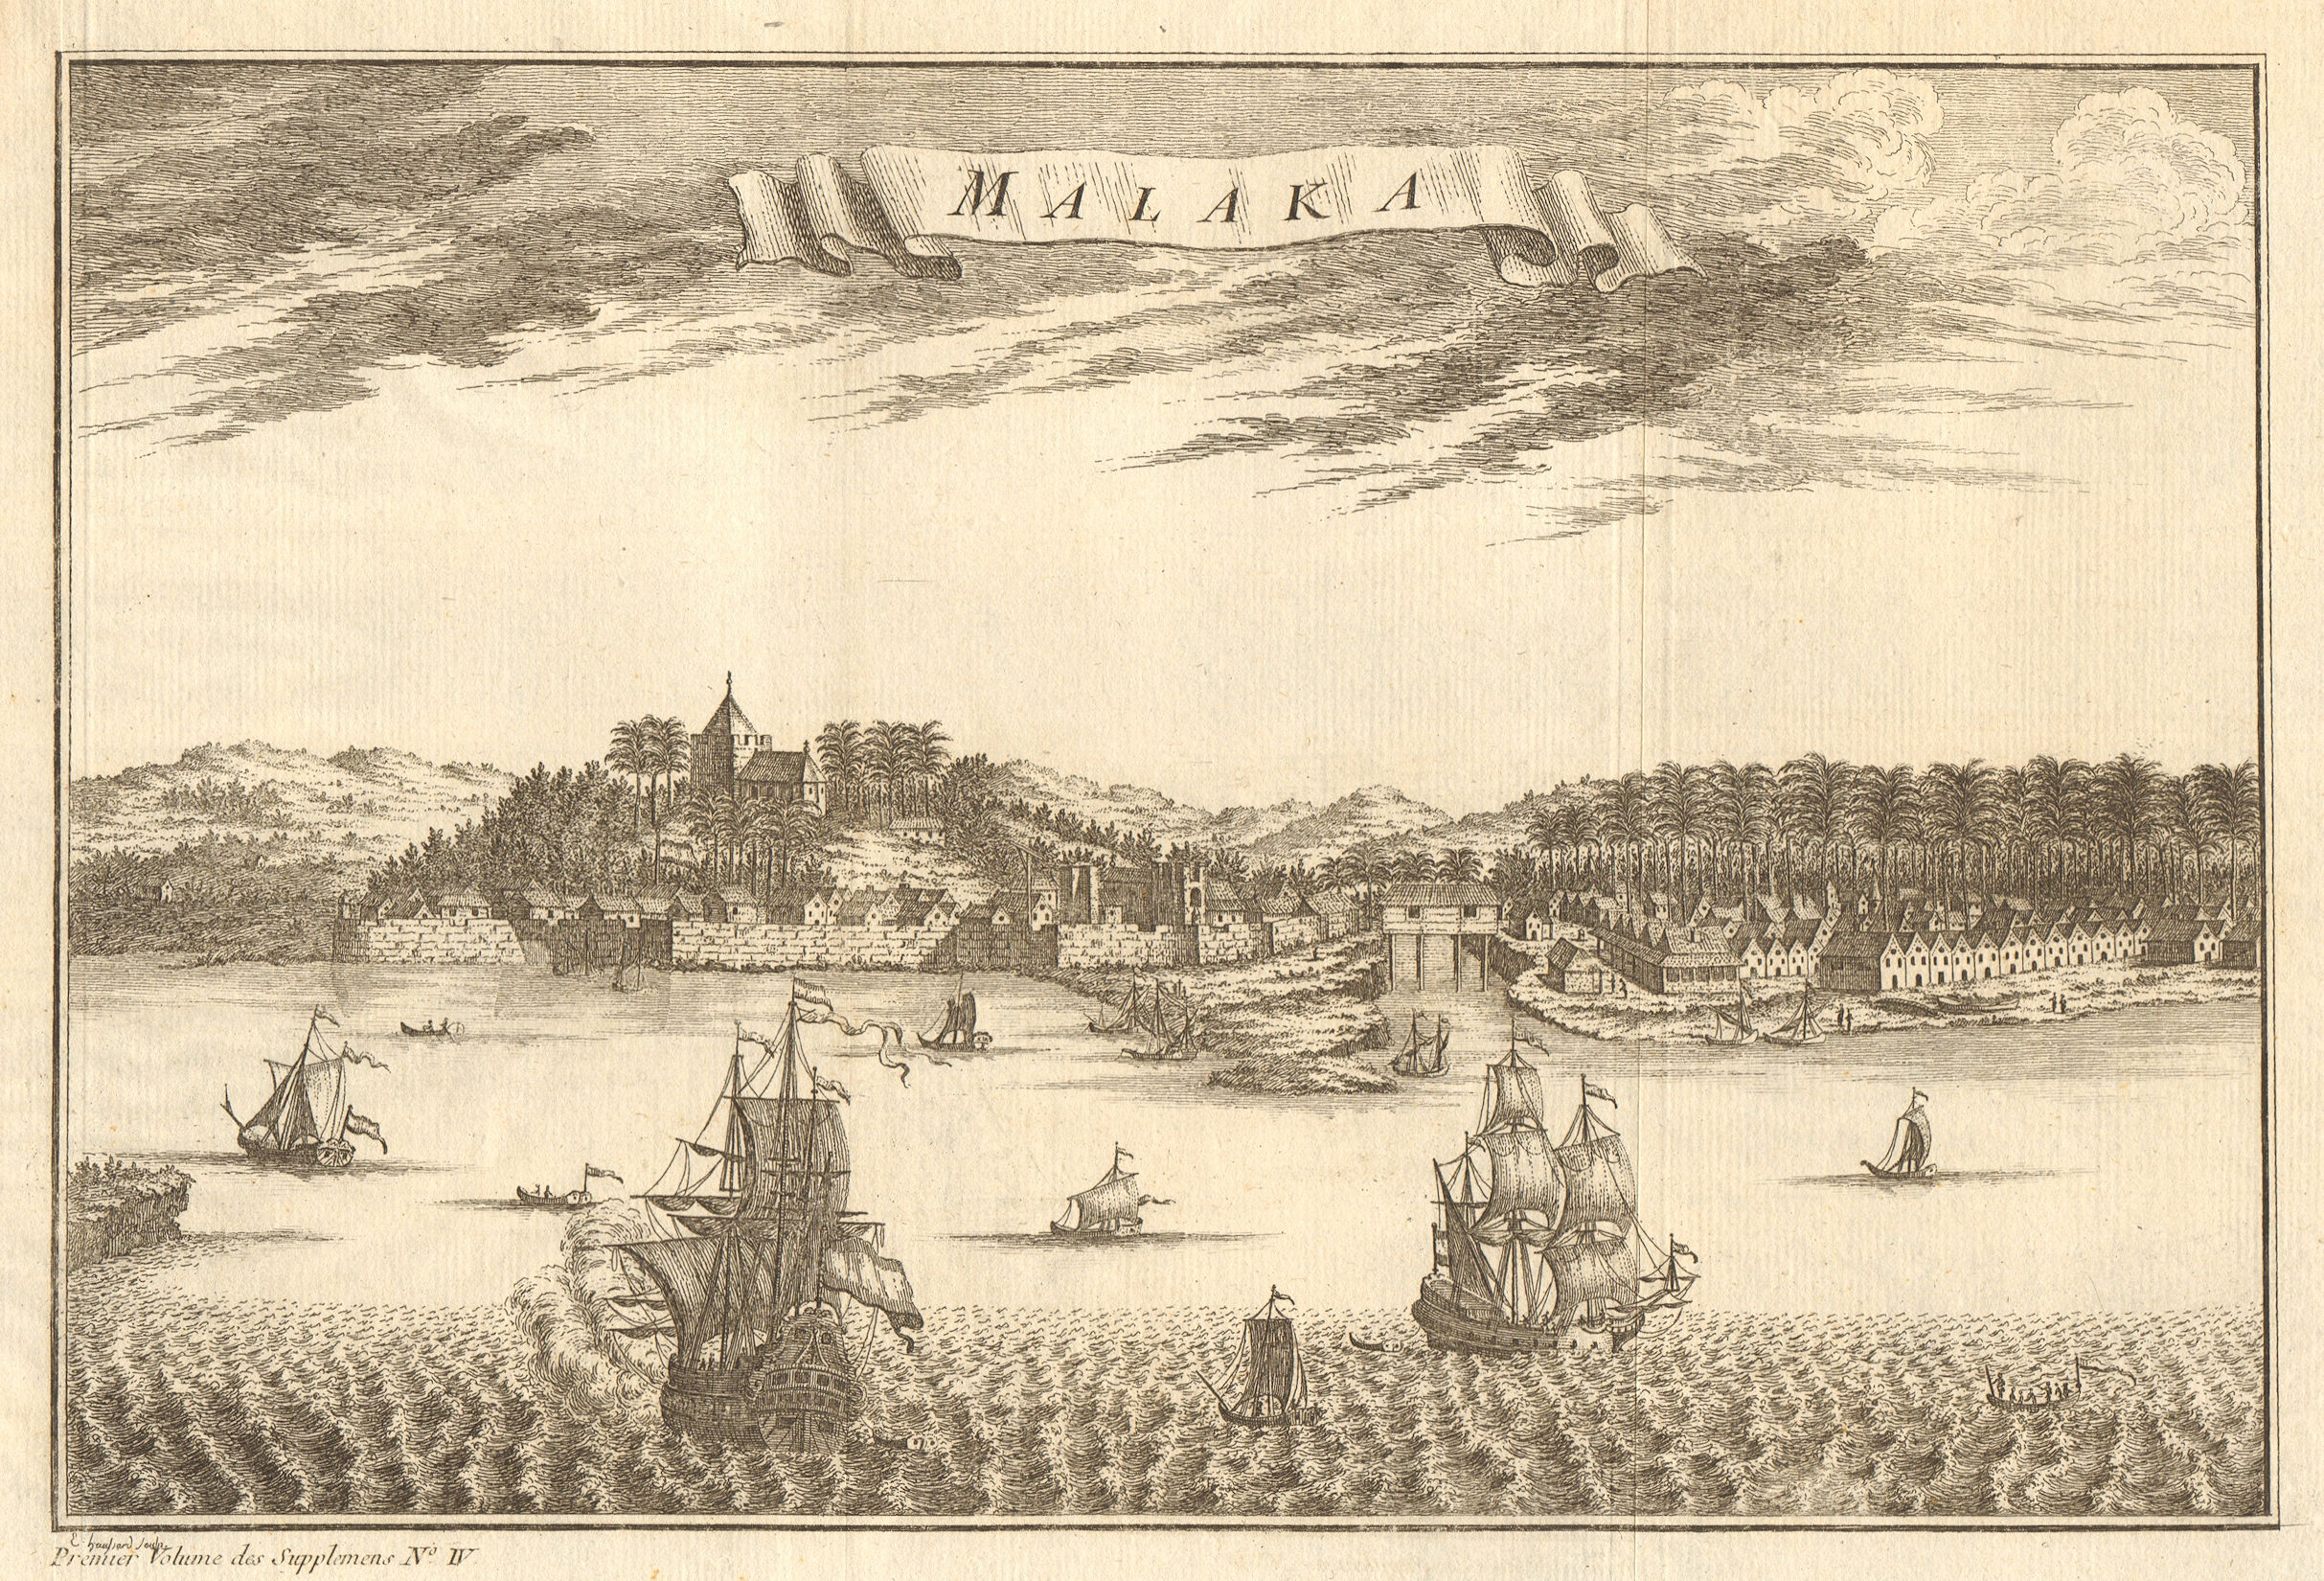 'Malaka'. View of Malacca city, Malaysia. East Indies 1761 old antique print